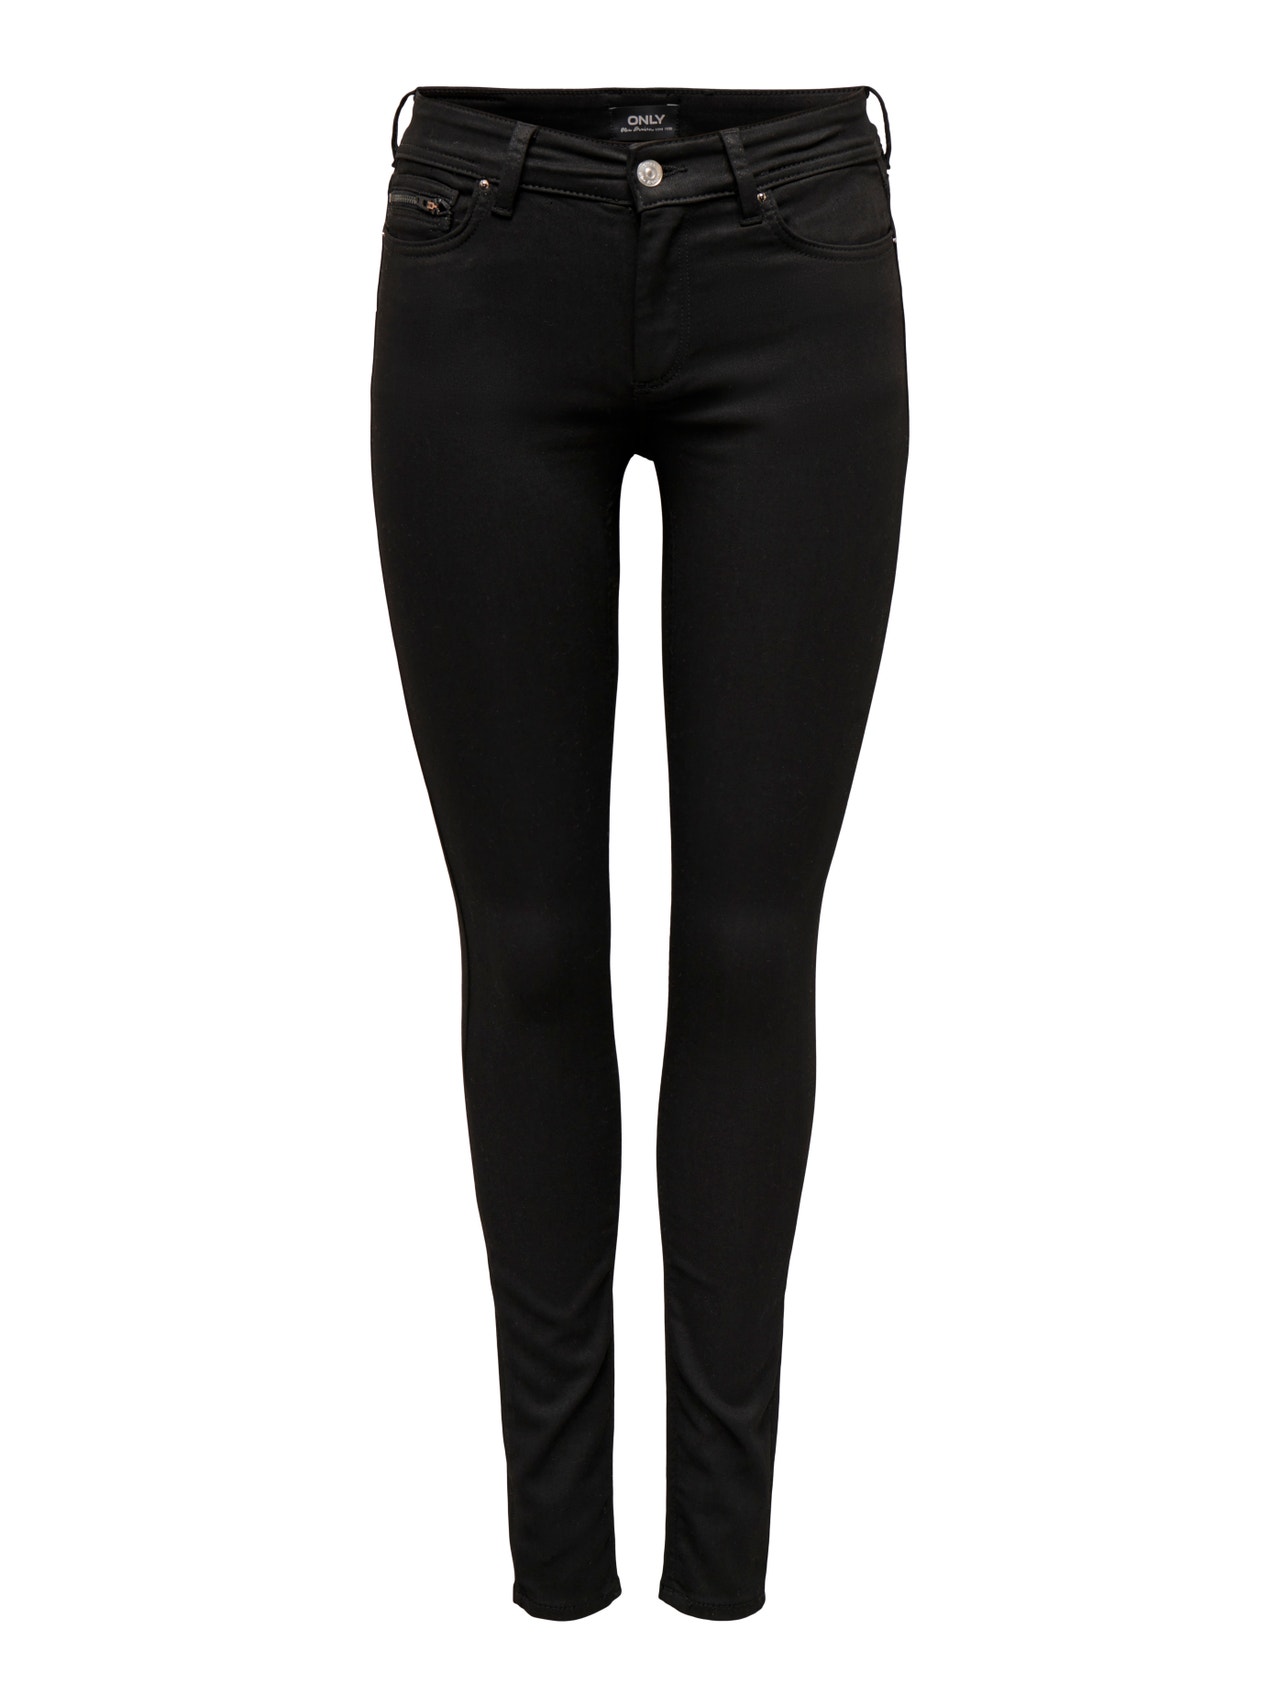 ONLY Skinny Fit Jeans -Black - 15281325